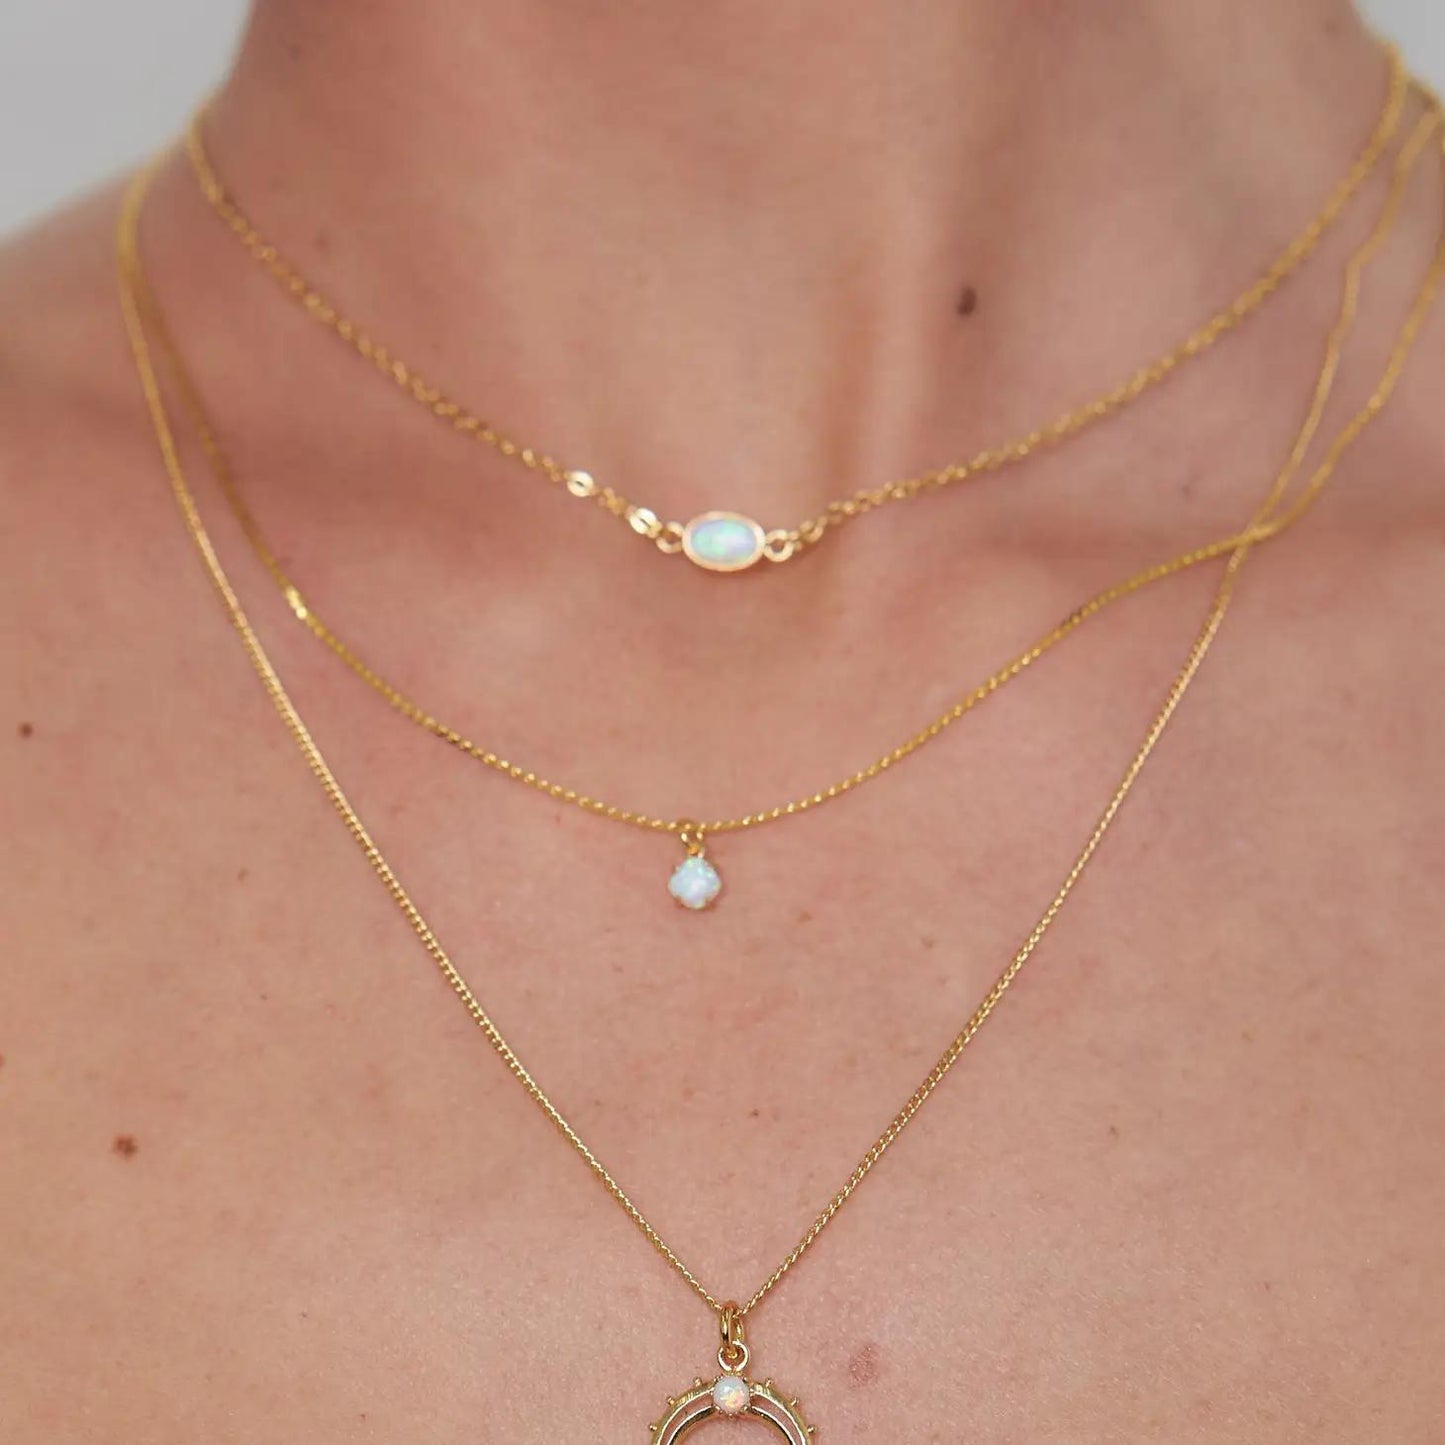 The Moon Opal Necklace